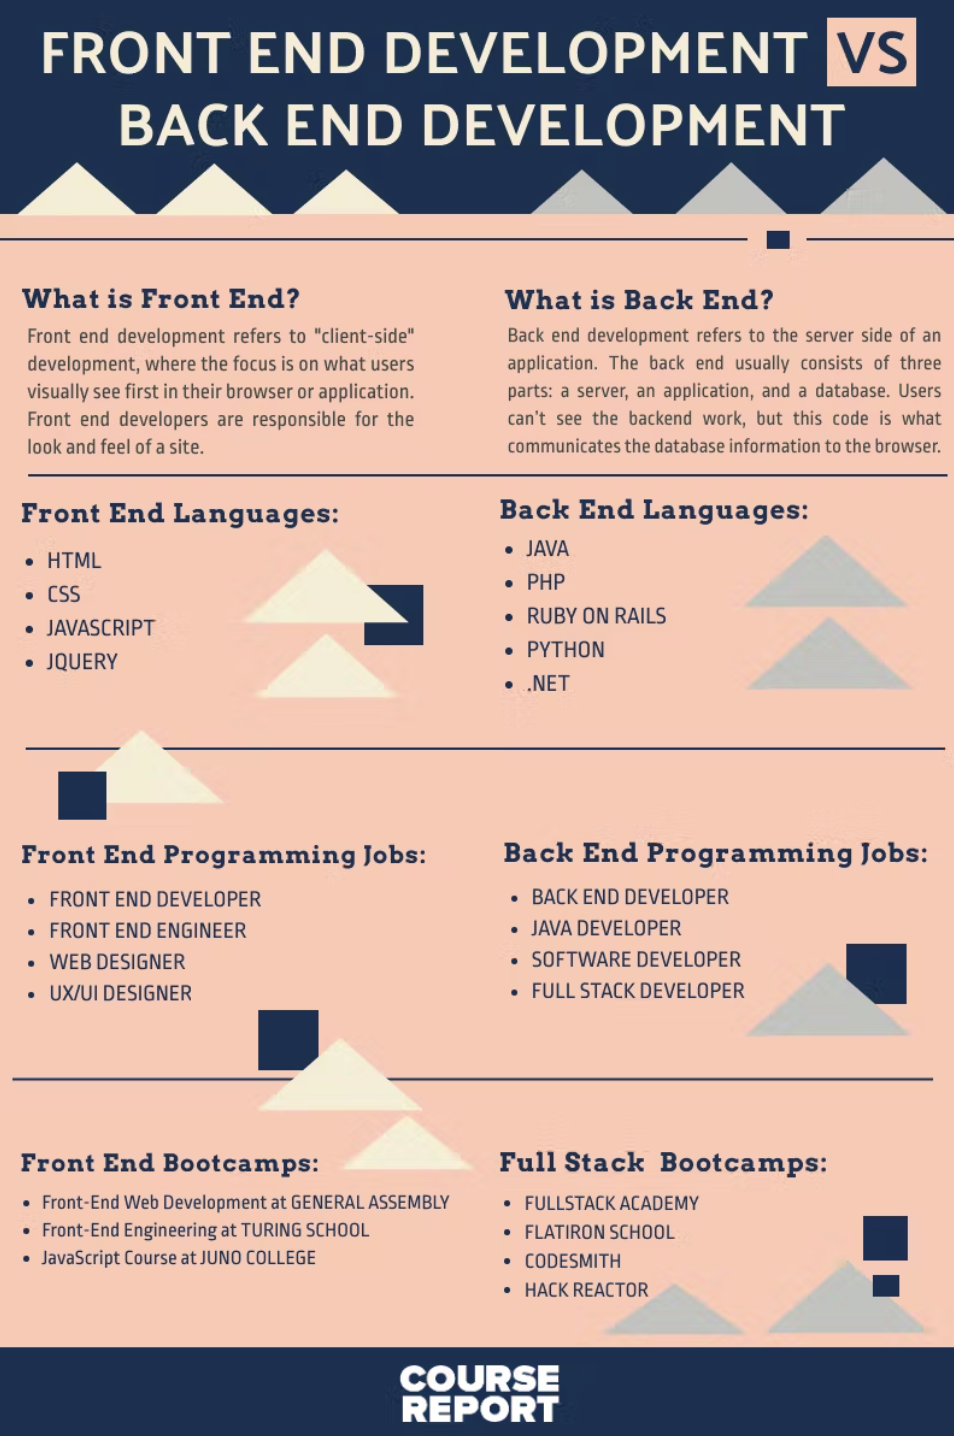 What is front end and back end in HTML?